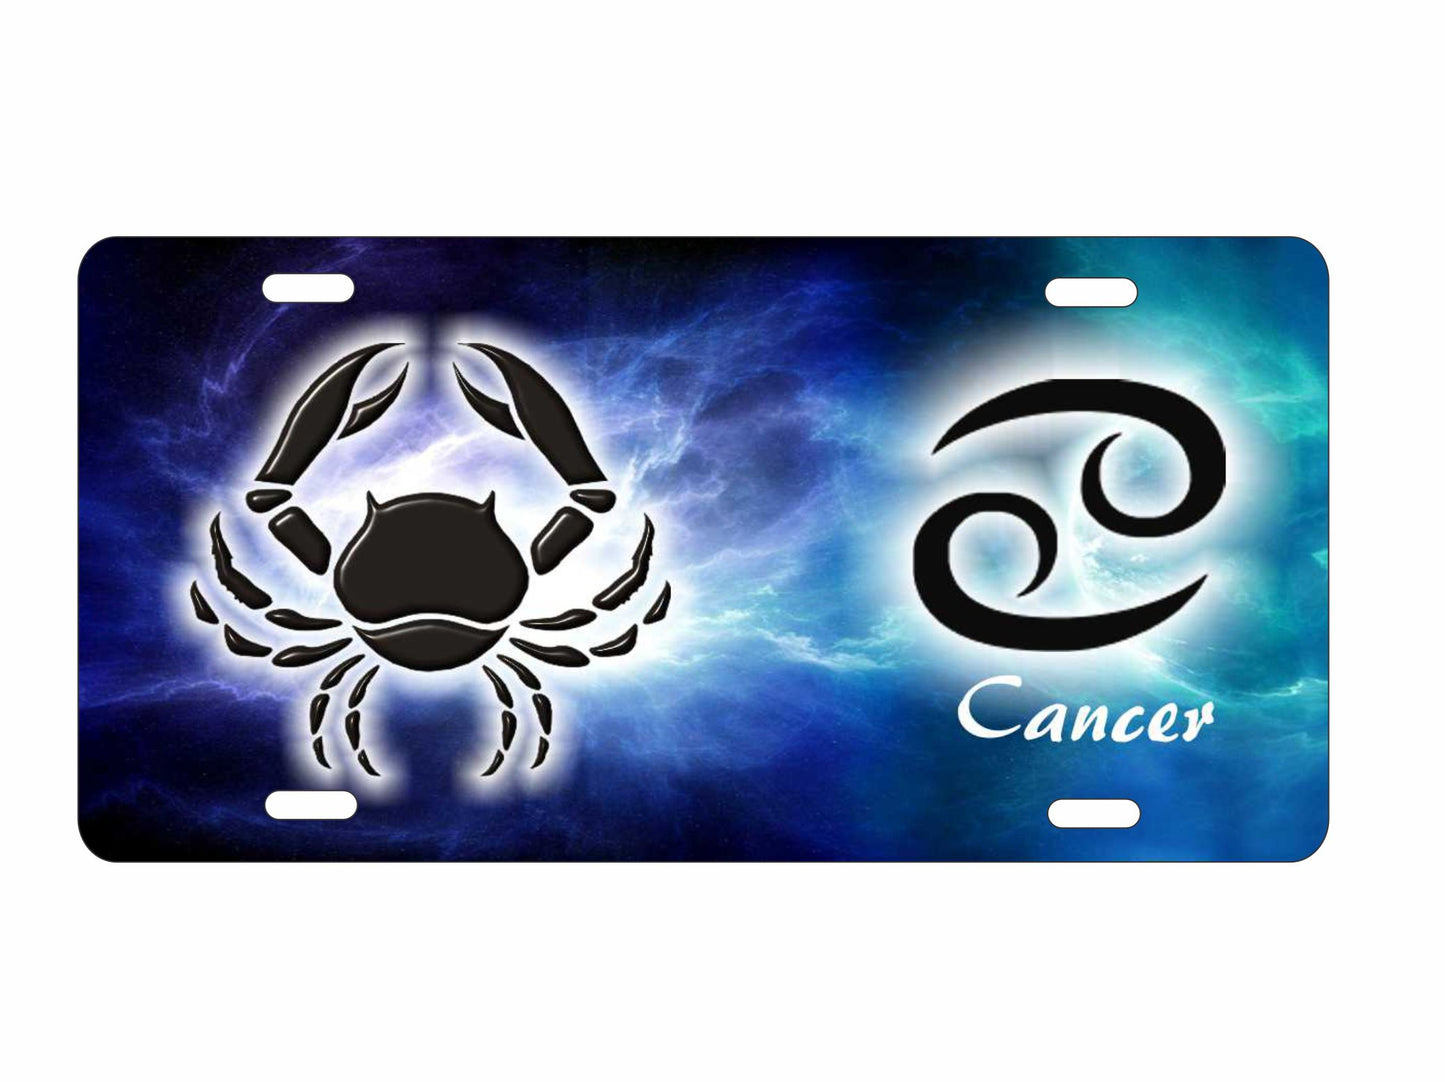 Cancer zodiac Astrological sign personalized novelty decorative front license plate